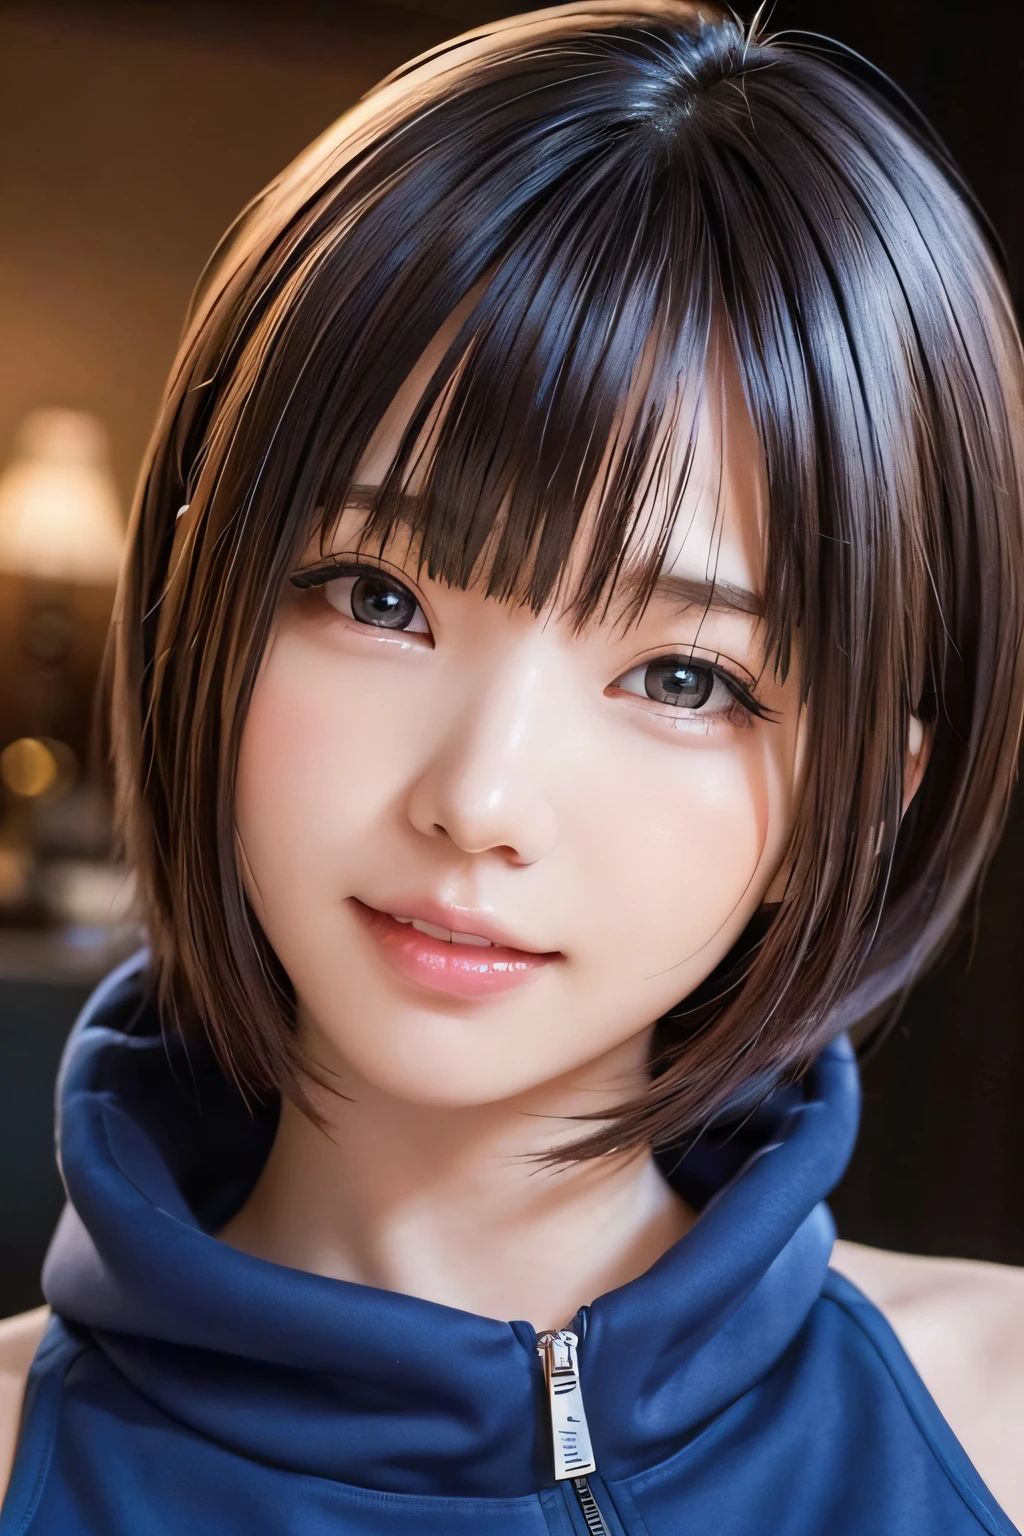 8k, best quality, masterpiece, realistic, ultra detail, photo realistic, hyper realistic, smoother lighting, increase cinematic lighting quality, realistic lighting, backlighting, brightening light, Increase quality, best quality real texture skin, 
close-up, slender, cute face, smile, beautiful details eyes, 19years old korean, pretty, Drill hair with electric blue color, hood,